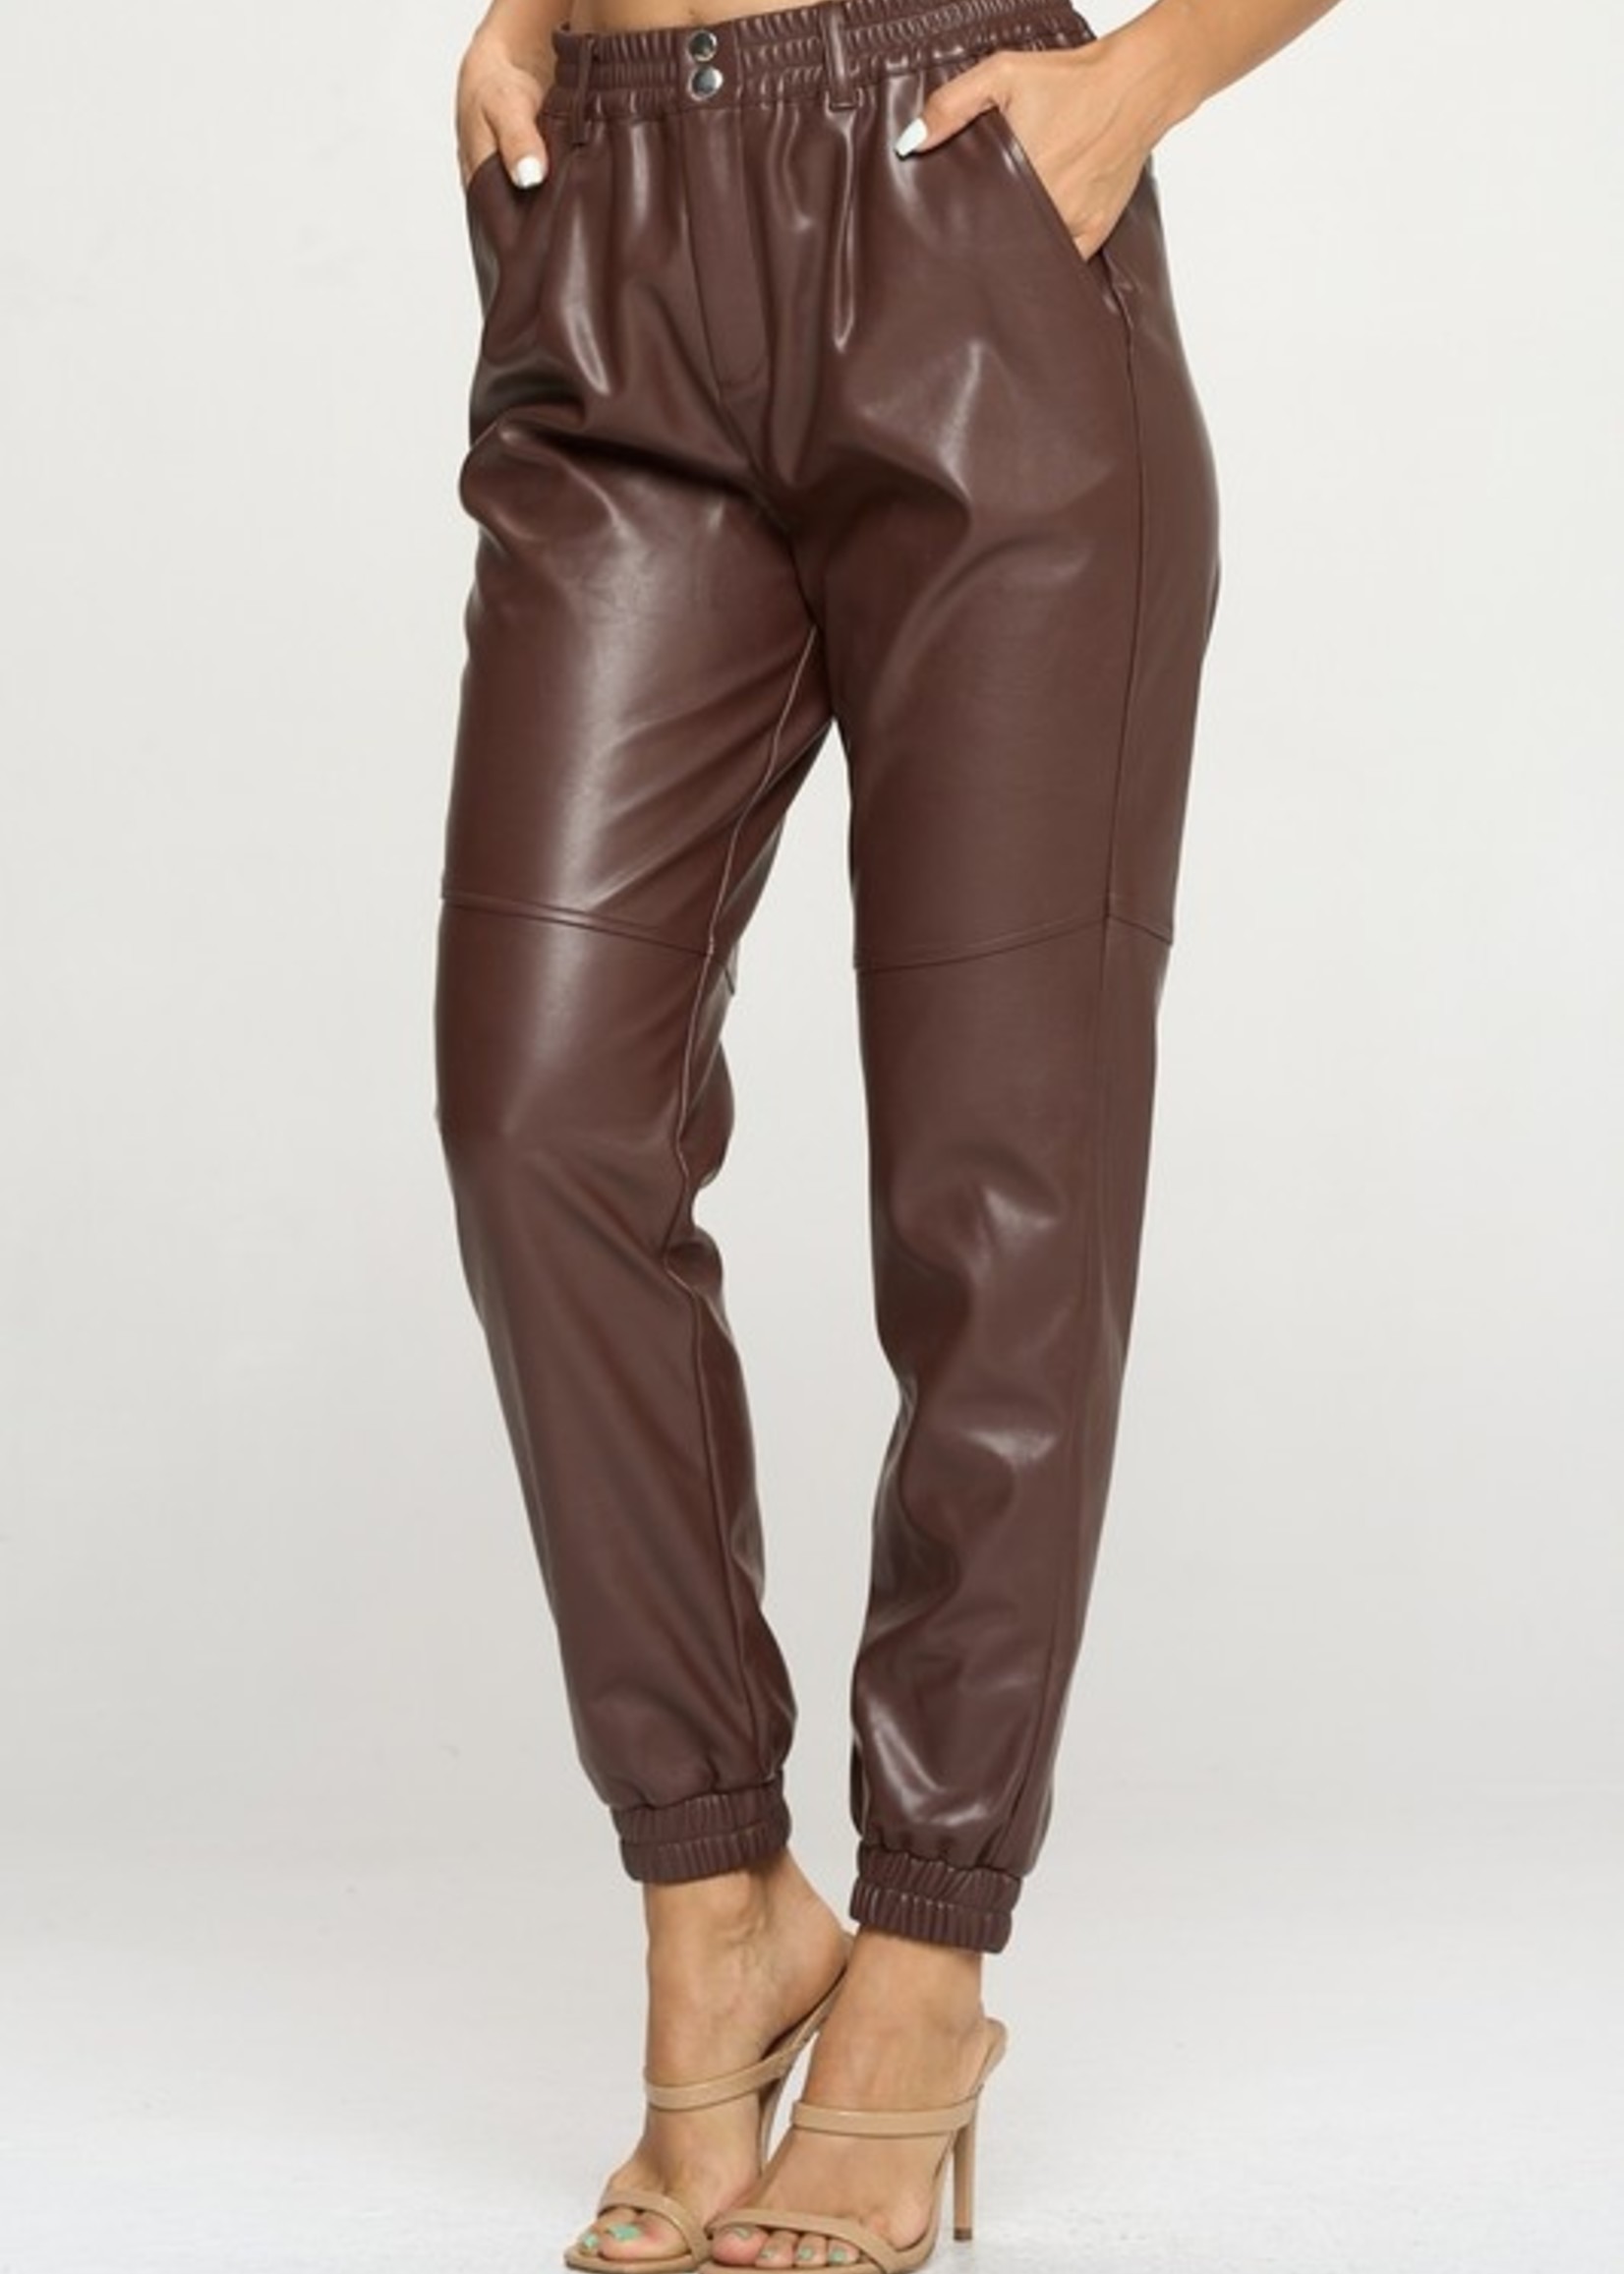 Leather jogger